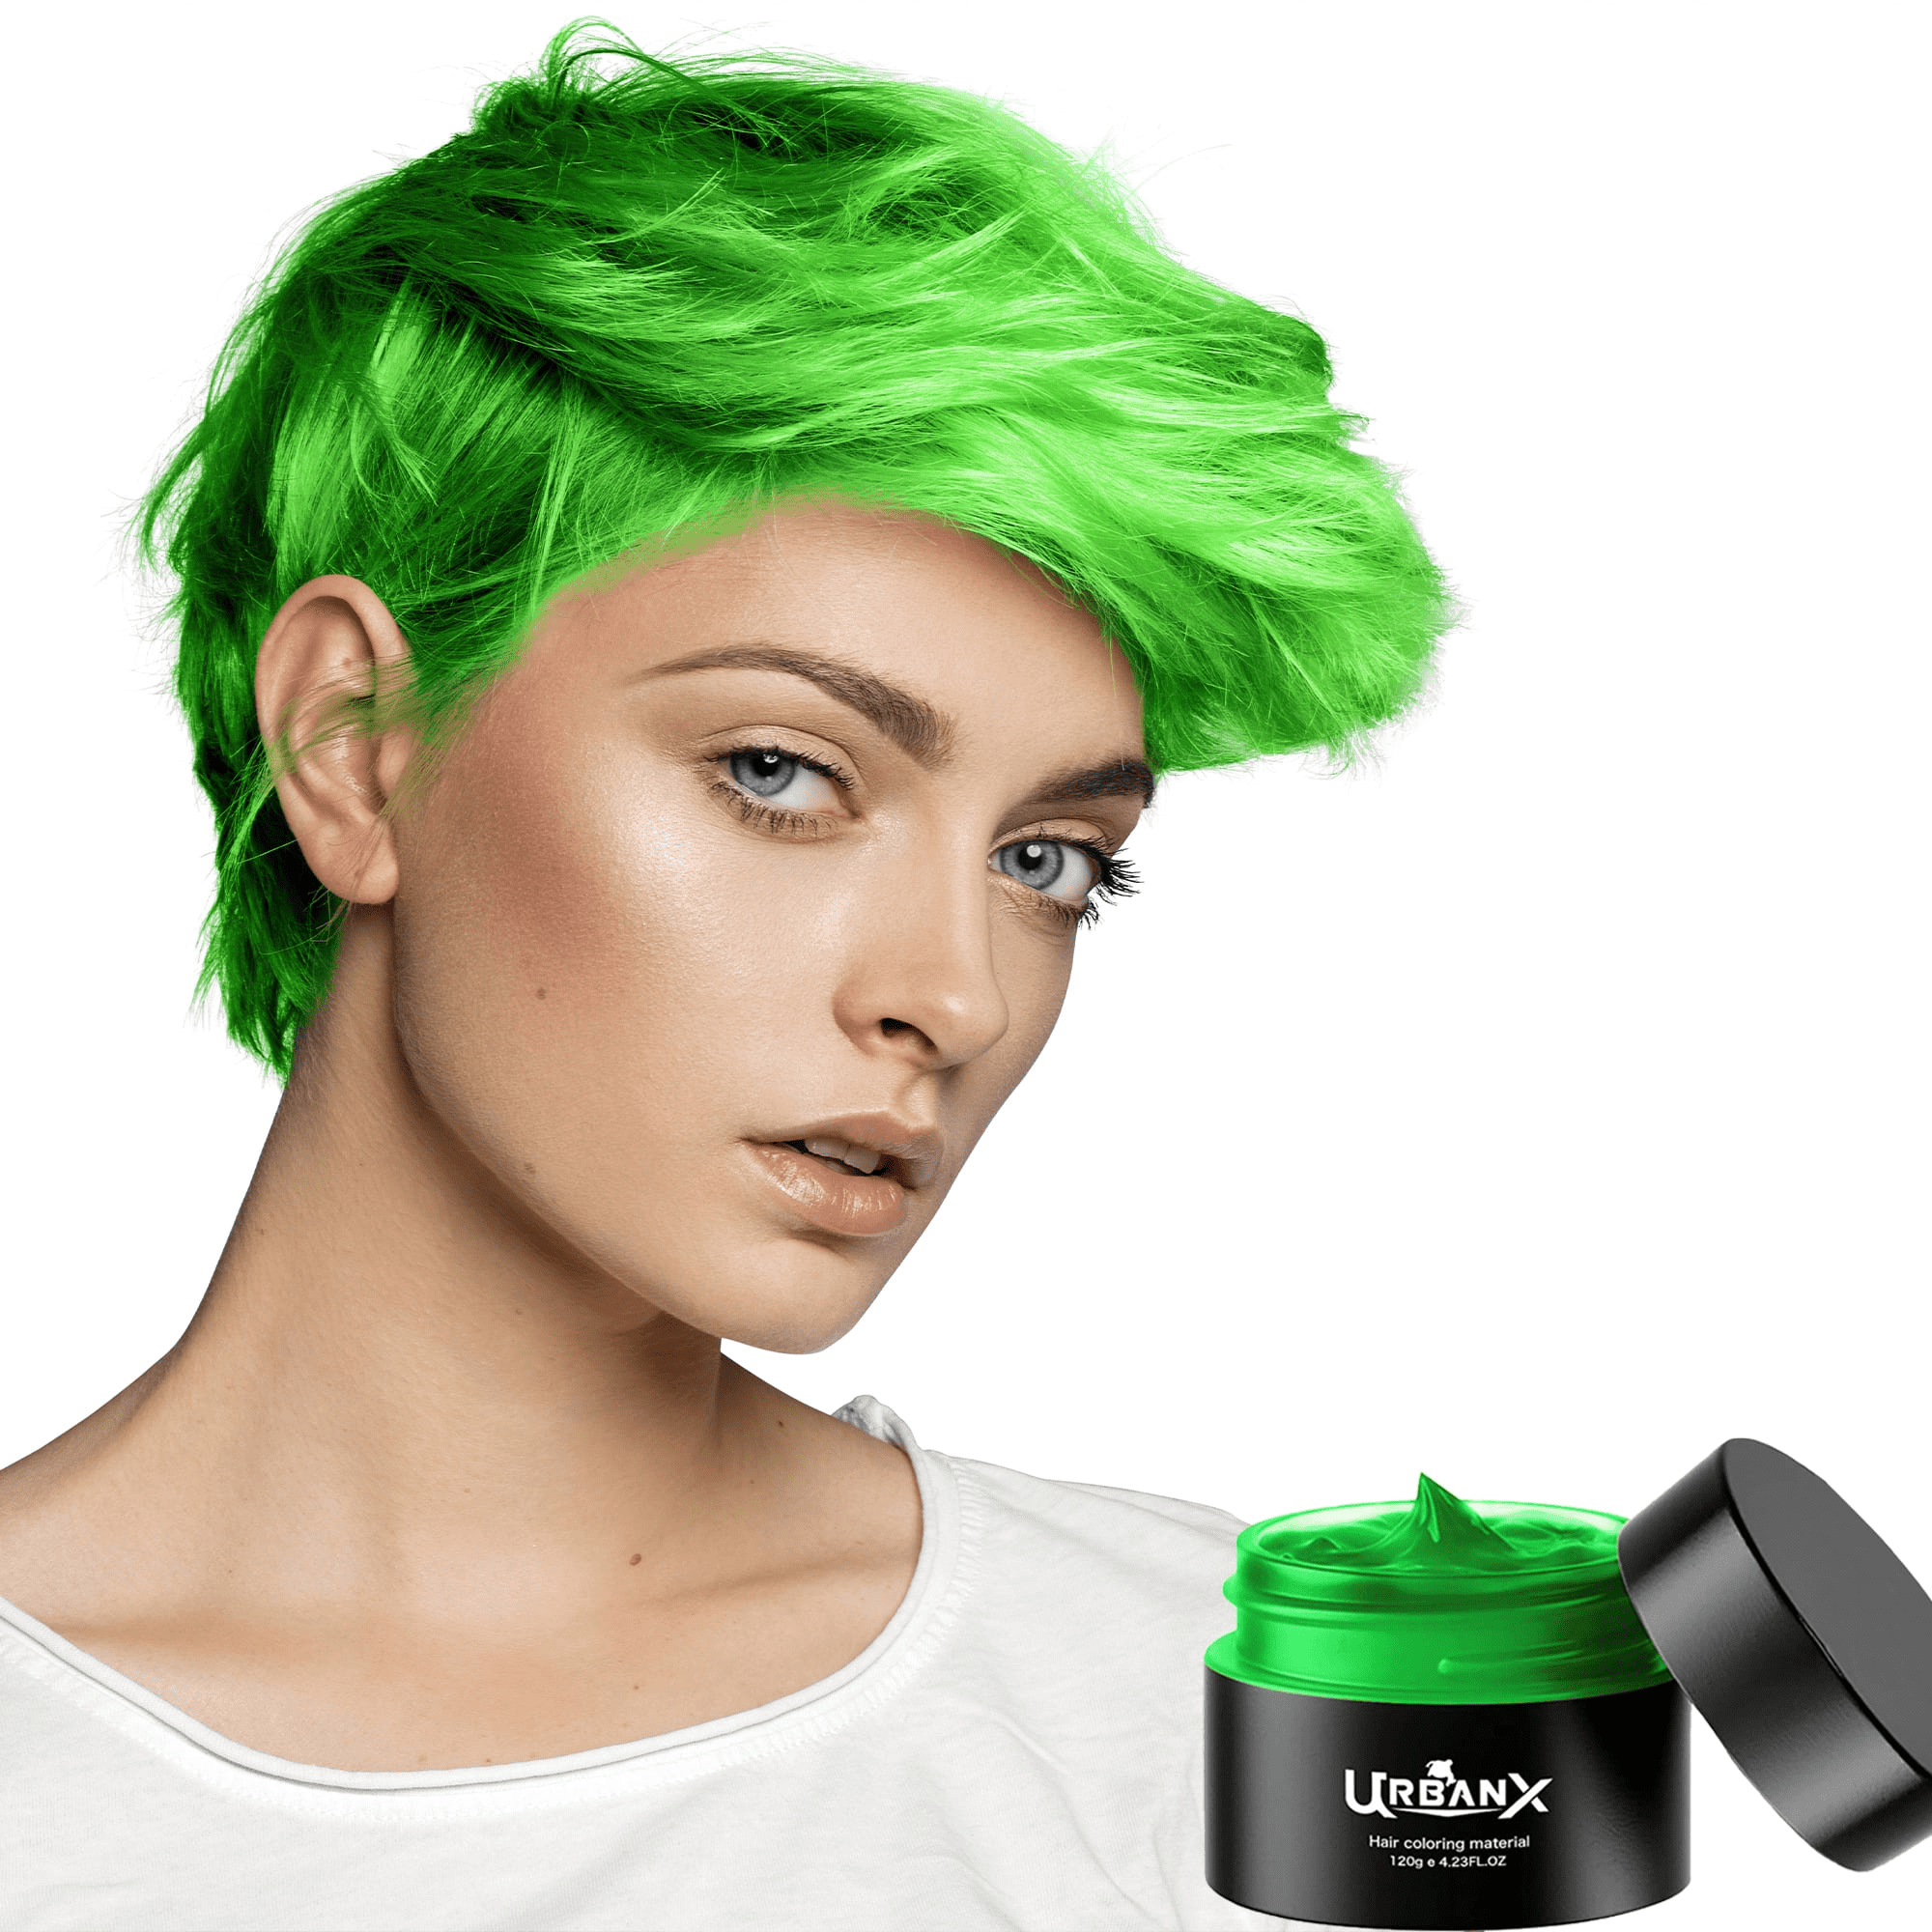 UrbanX Washable Hair Coloring Wax Material Unisex Color Dye Styling Cream  Natural Hairstyle for Men Pomade Temporary Party Cosplay Natural Ingredients  - Orange 